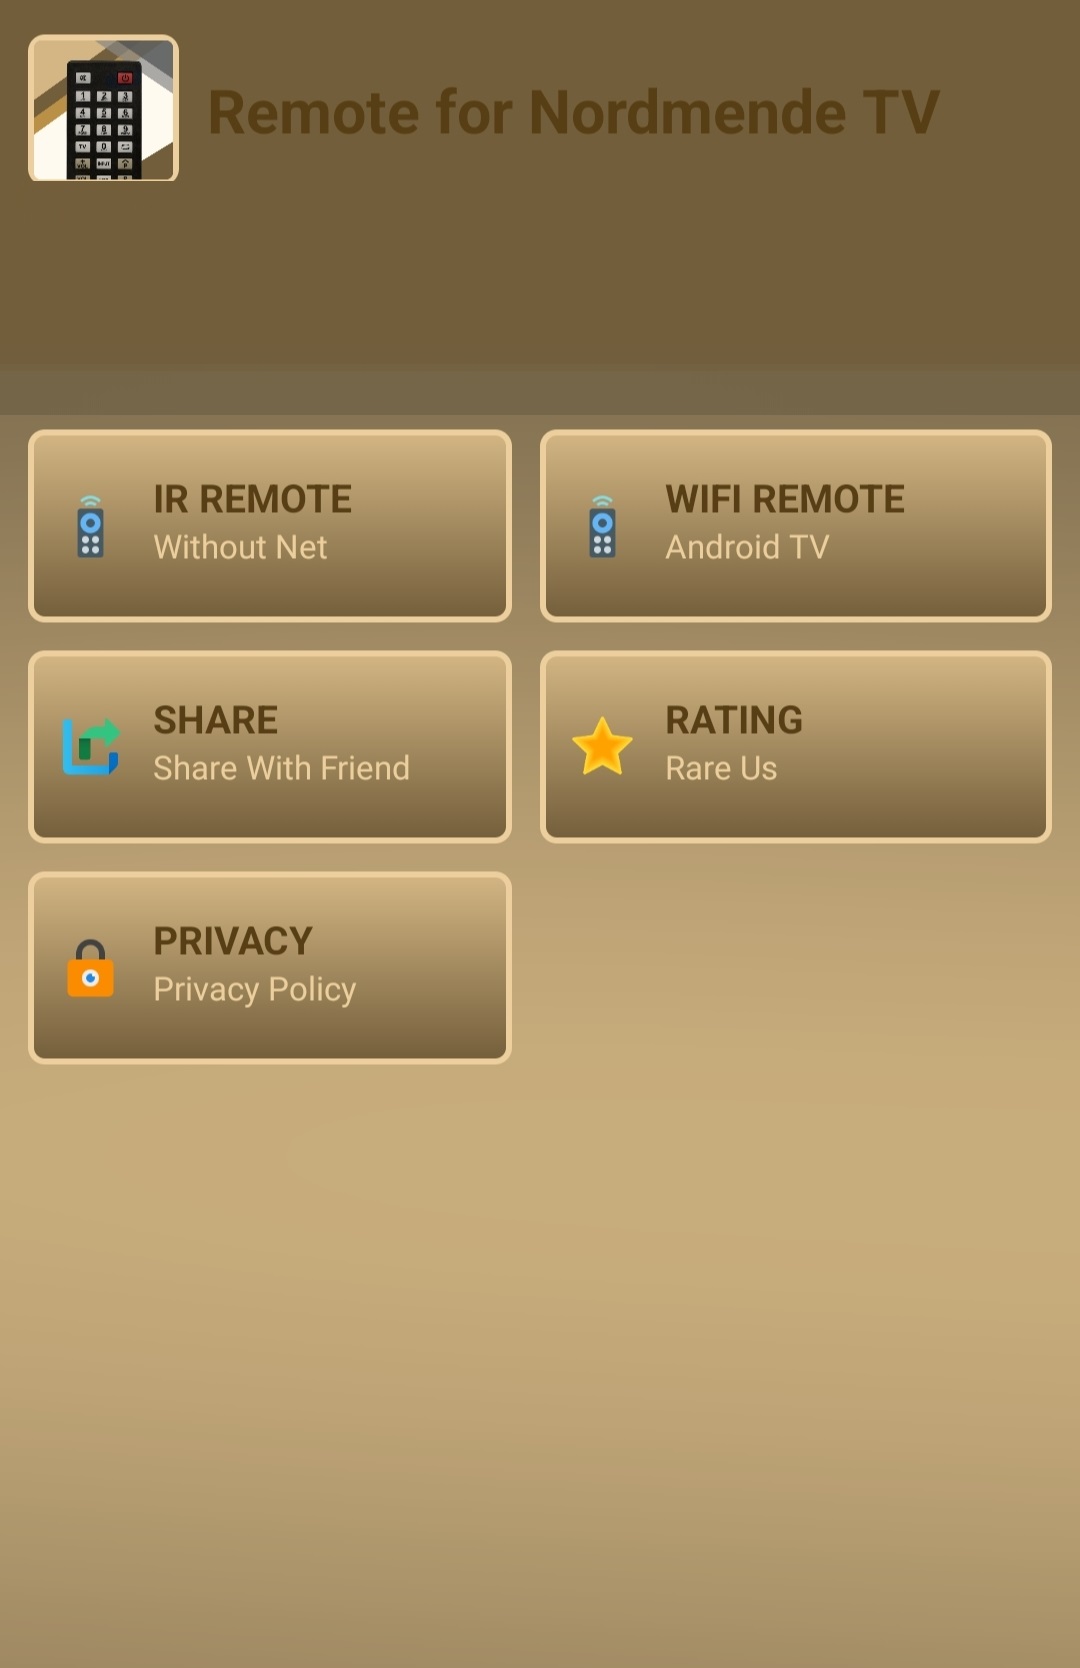 Select IR Remote or WiFi Remote